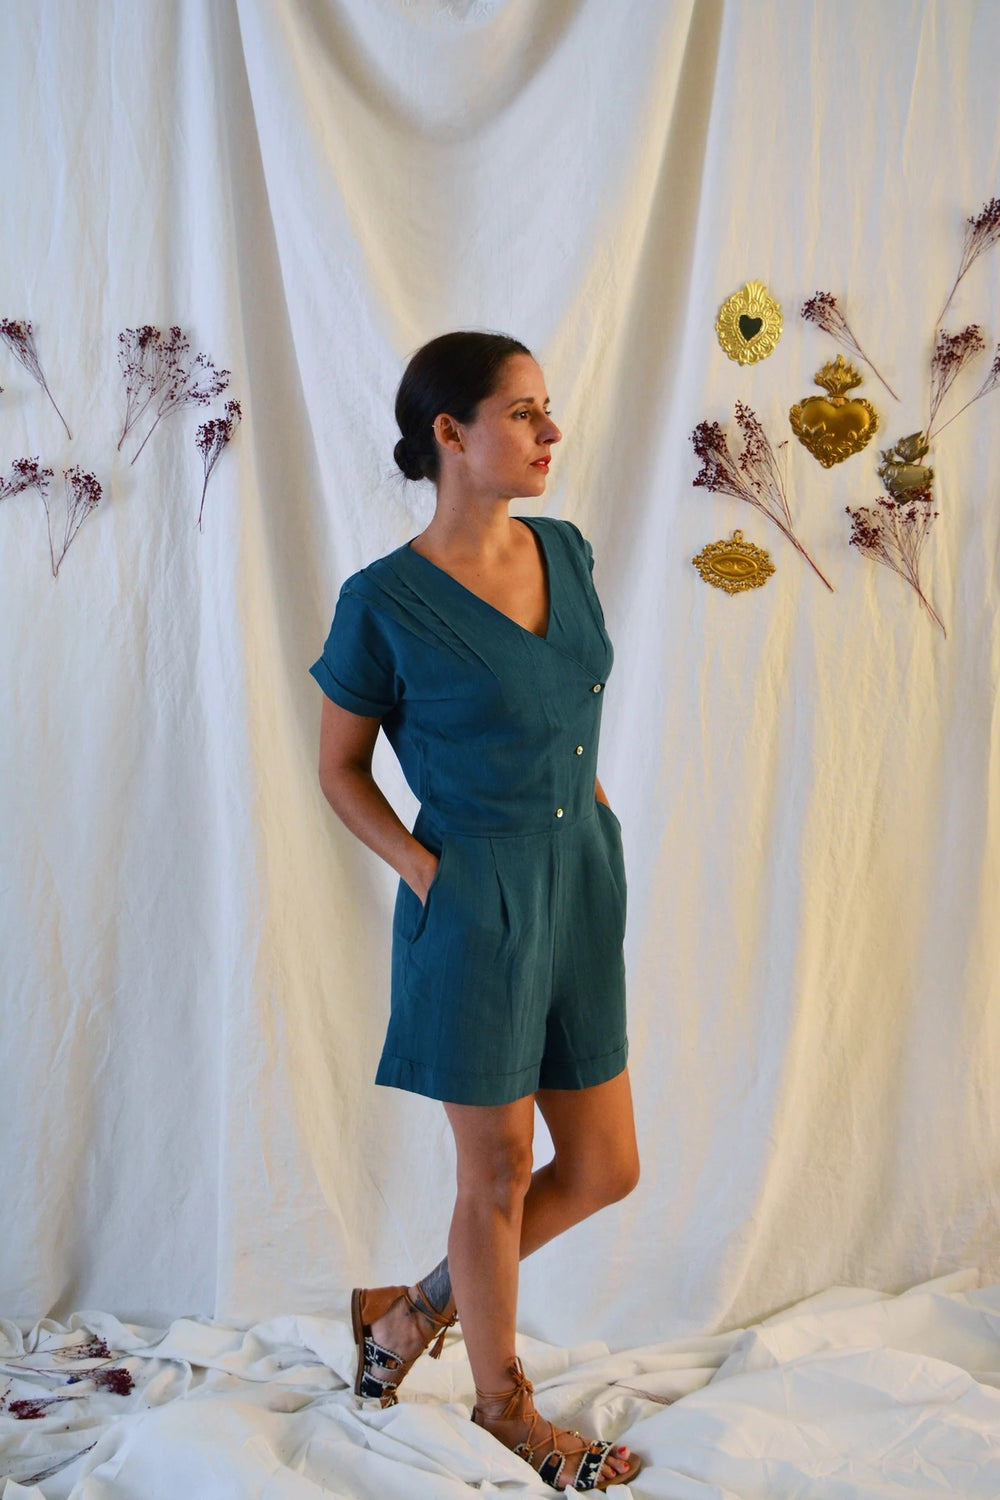 Woman wearing the Eclipse Playsuit and Dress sewing pattern from Maison Fauve on The Fold Line. A playsuit pattern made in cotton poplin, tencel, light denim, viscose, crepe or cotton satin fabrics, featuring angled front pockets, V-neck, short sleeves wi